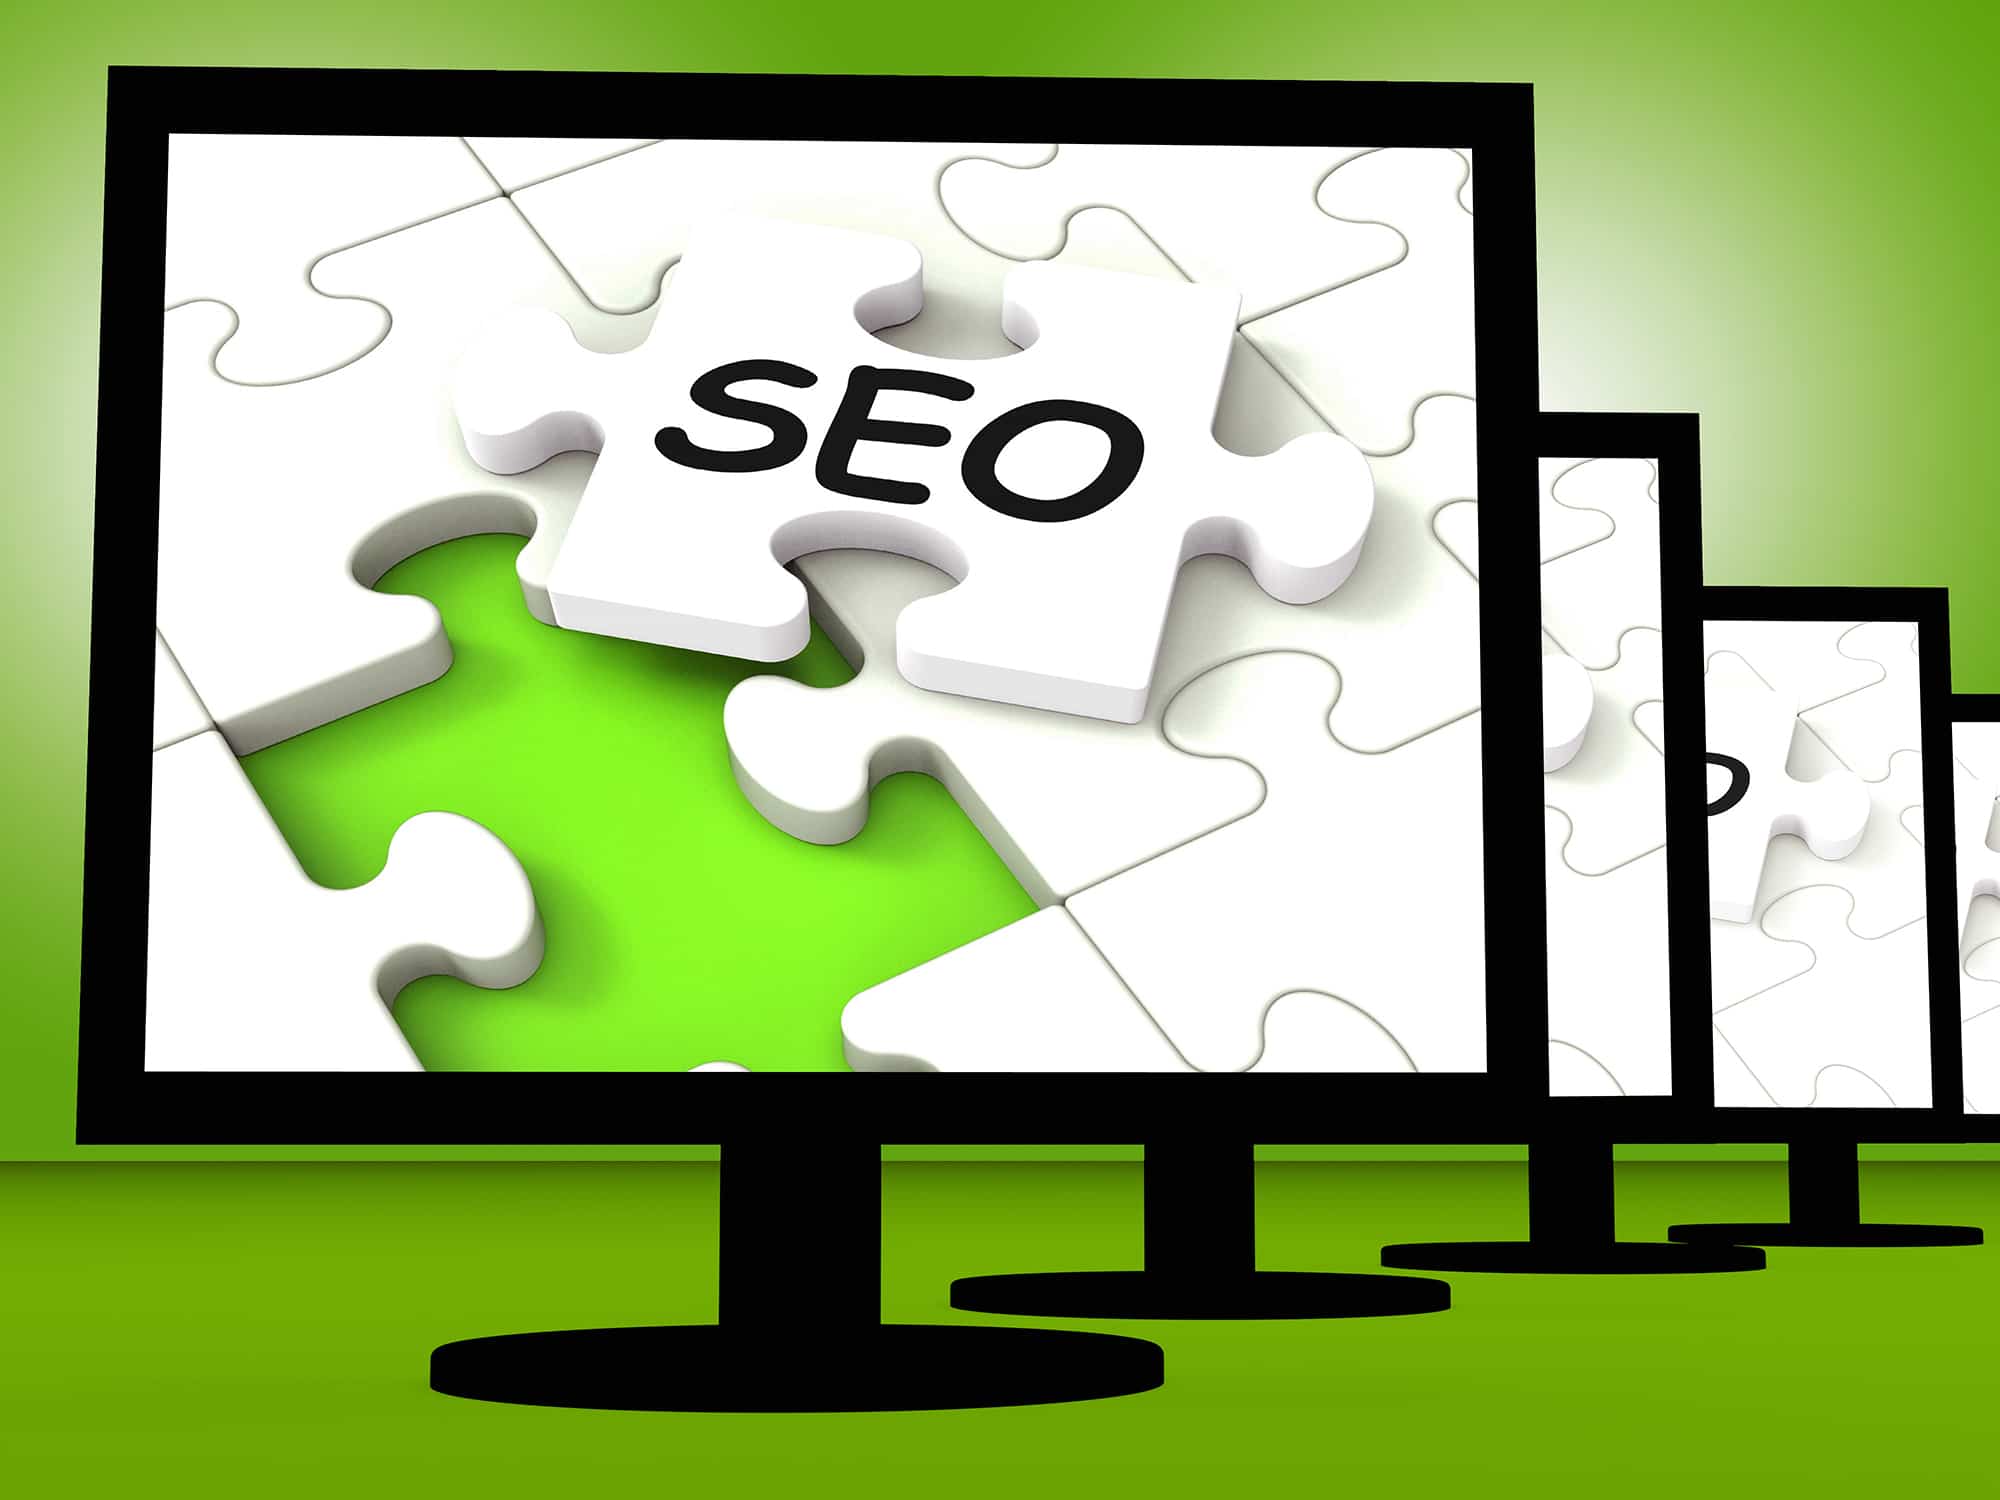 Best vSEO Company,Professional Video SEO Company,SEO Companies For Small Businesses,Page Rank,YouTube Marketing Expert,Best SEO Video Business,SEO Video Experts